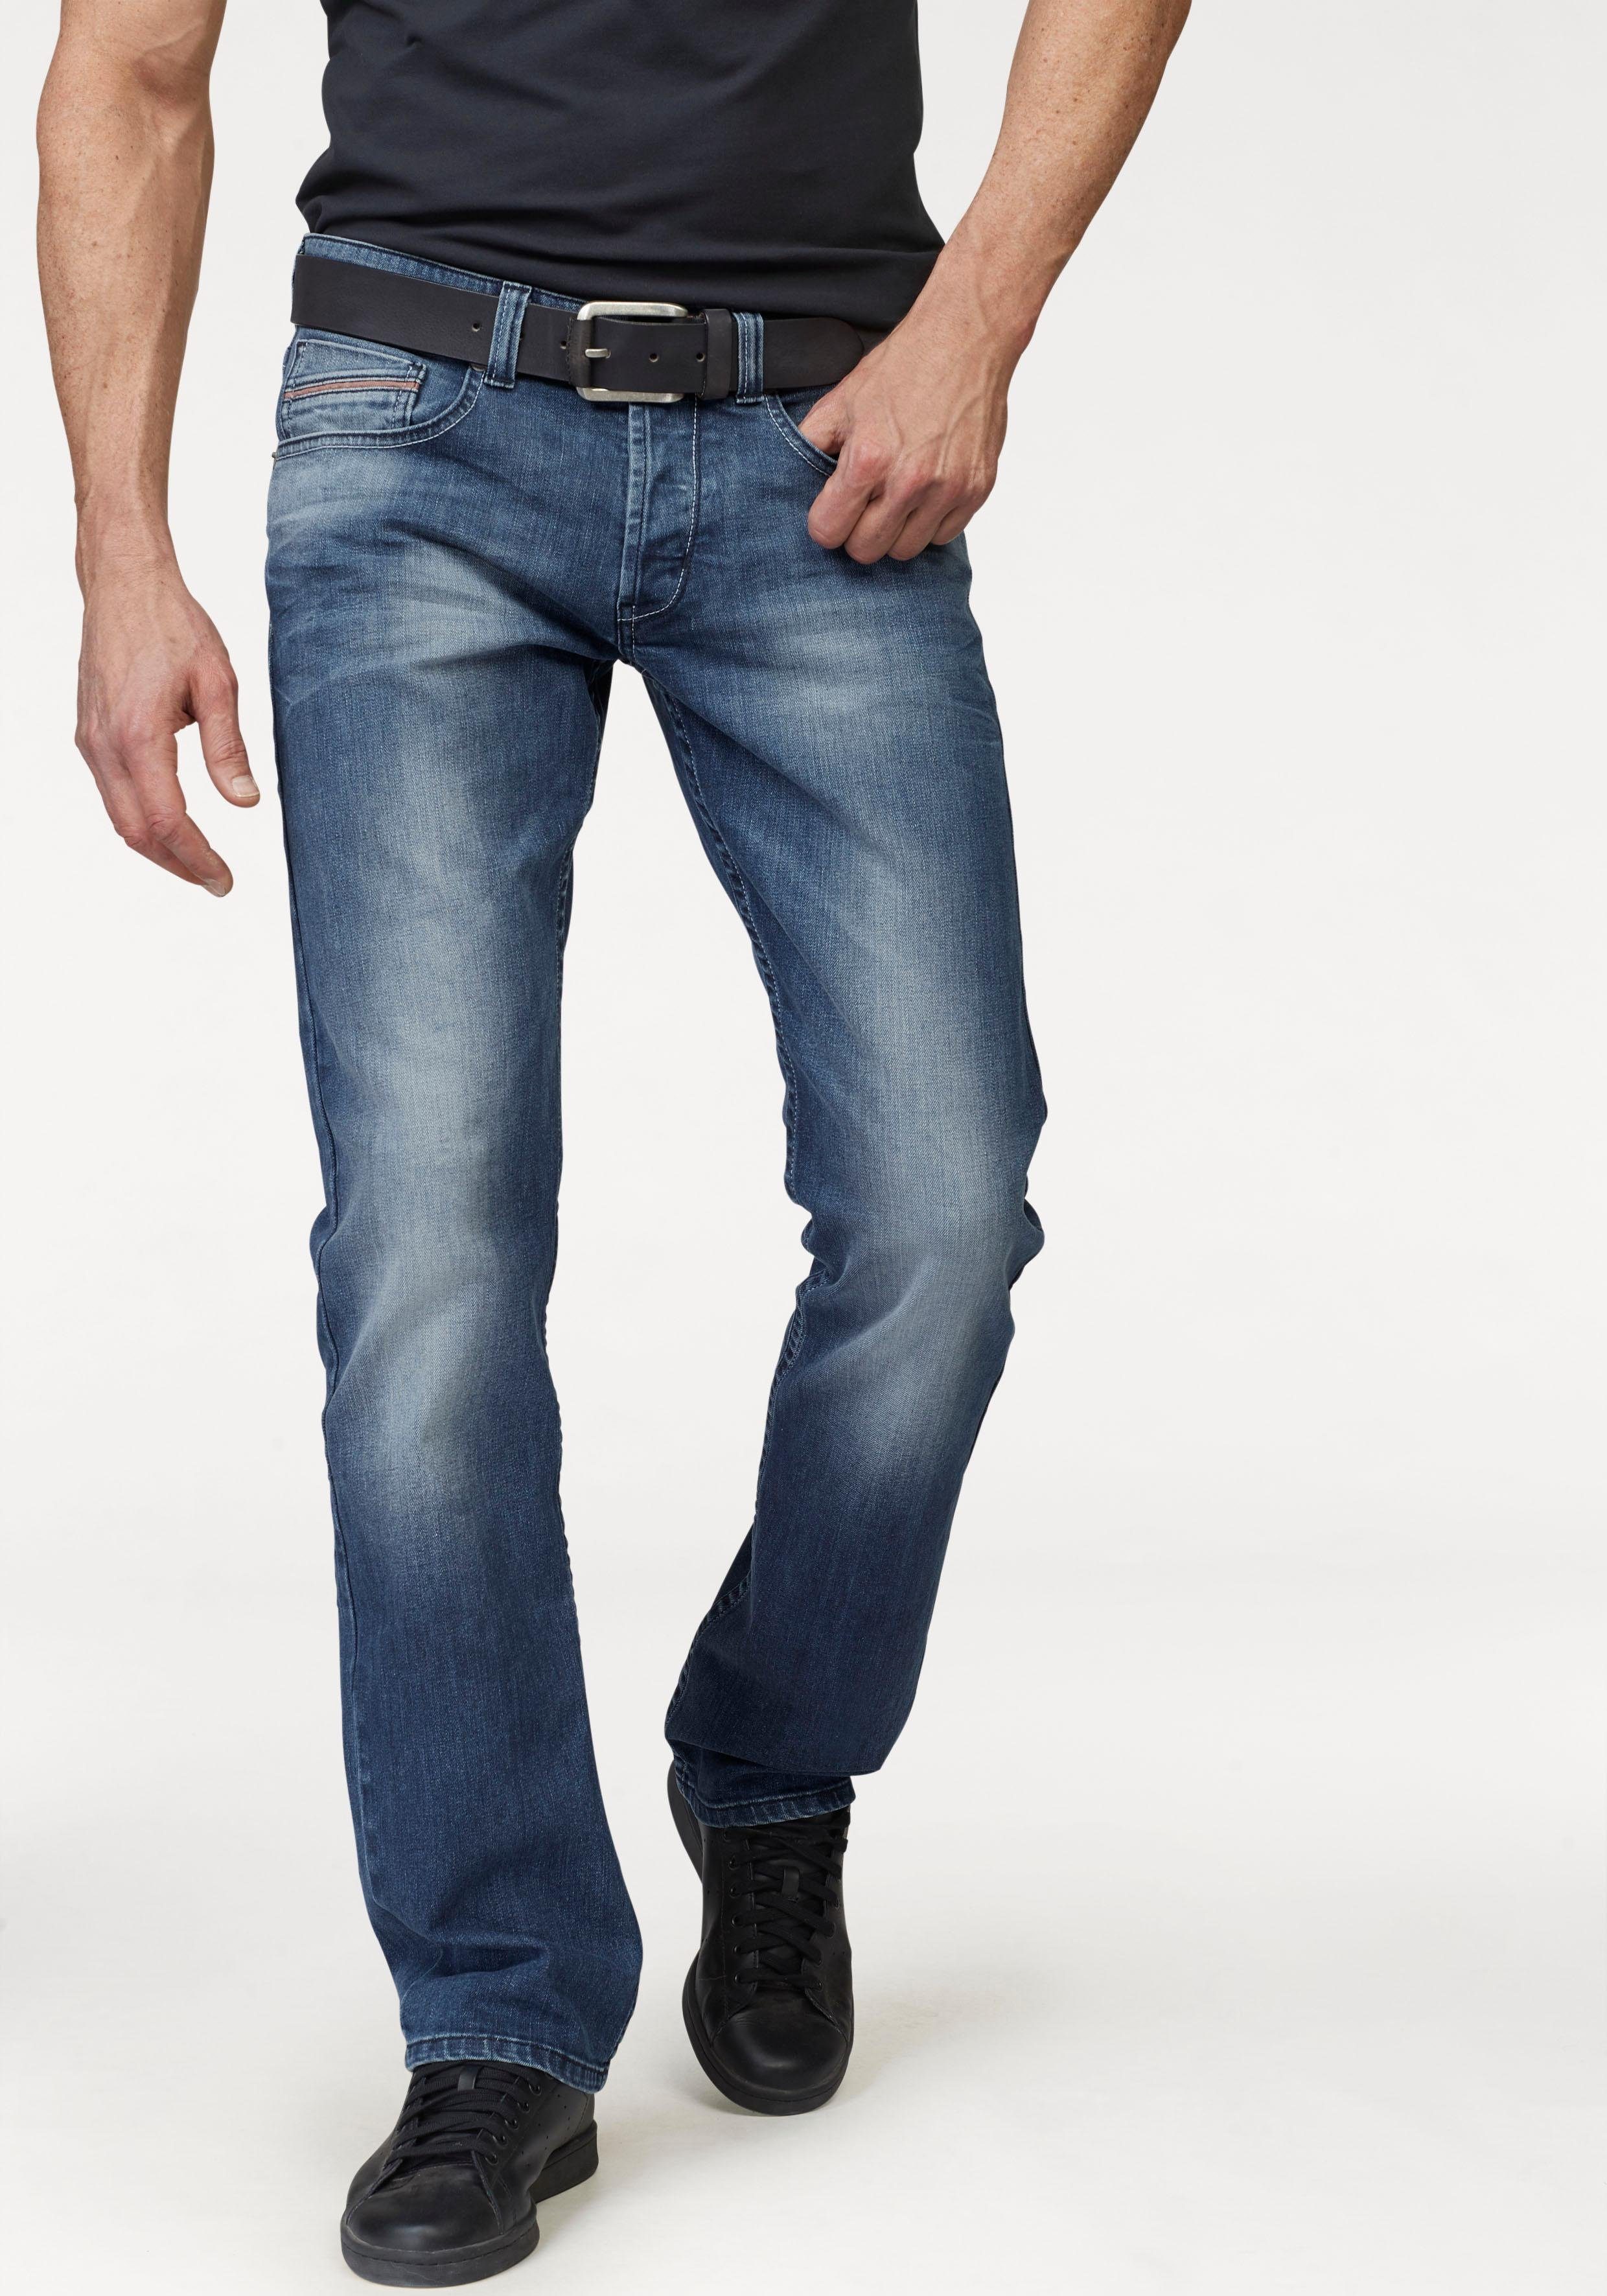 Bruno Banani Straight-Jeans Dylan